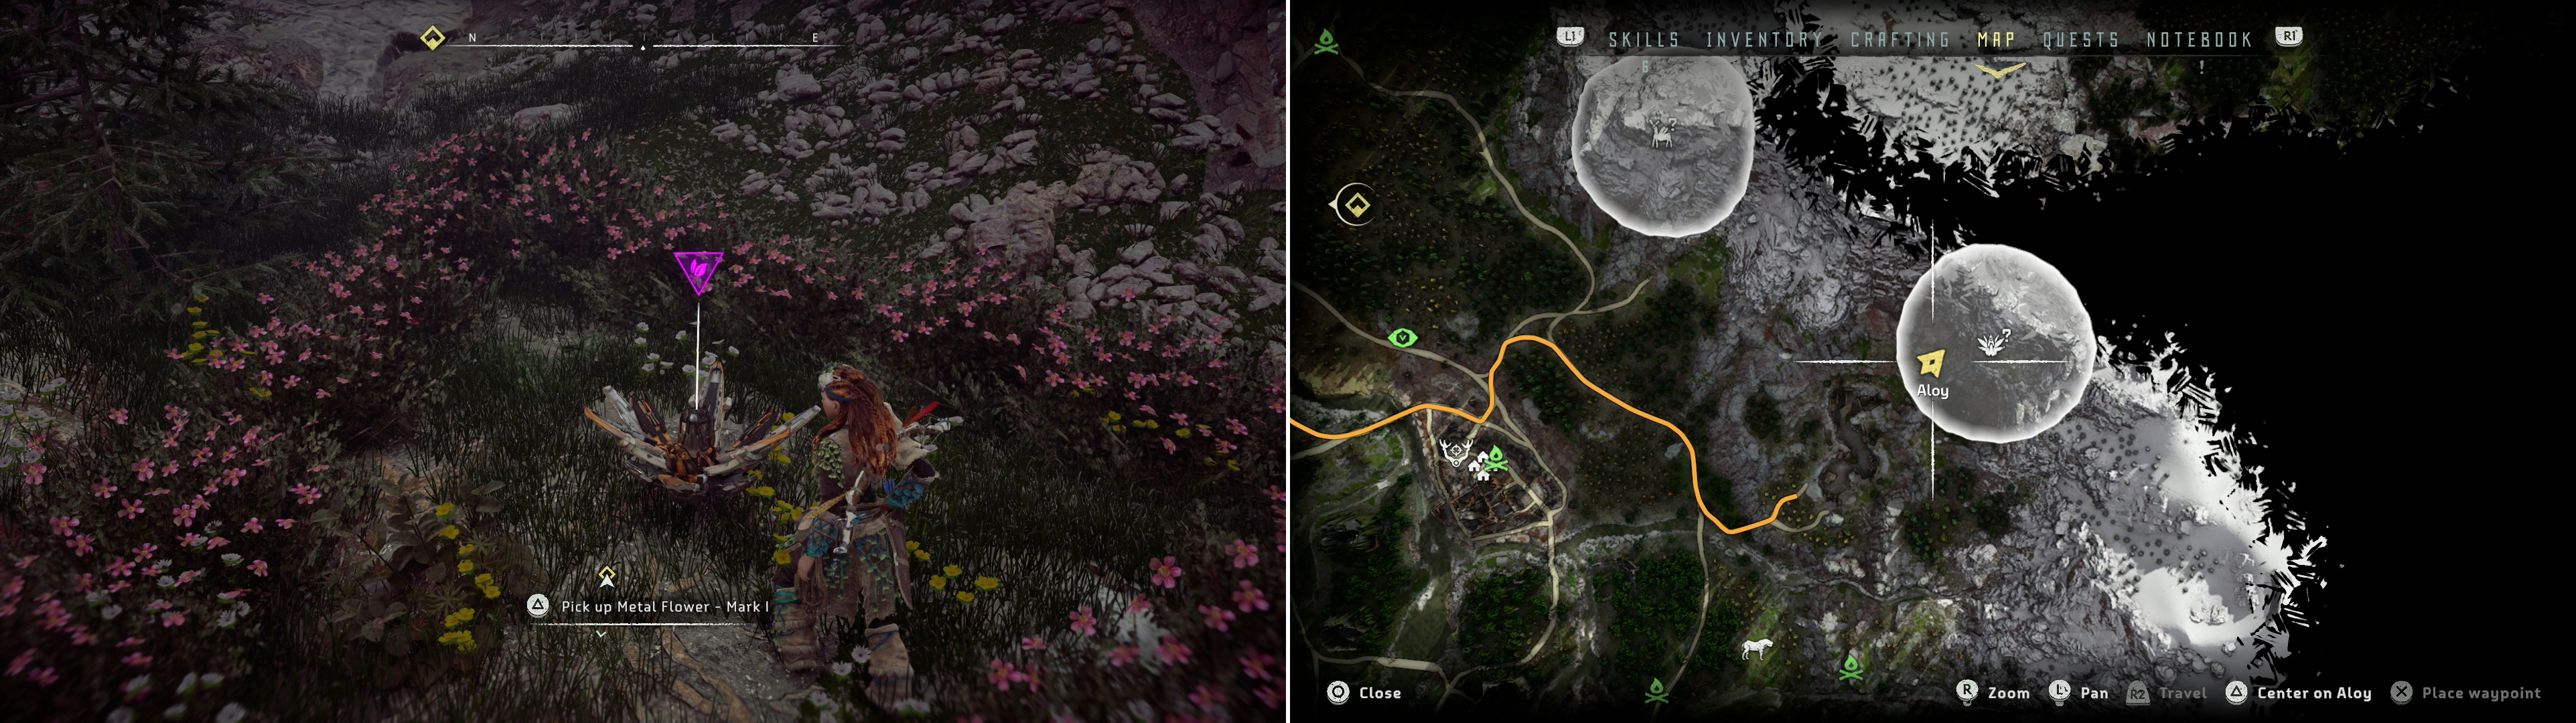 Search near the cultist camp to find Metal Flower - Mark I (D) (left), at the location indicated on the map (right).